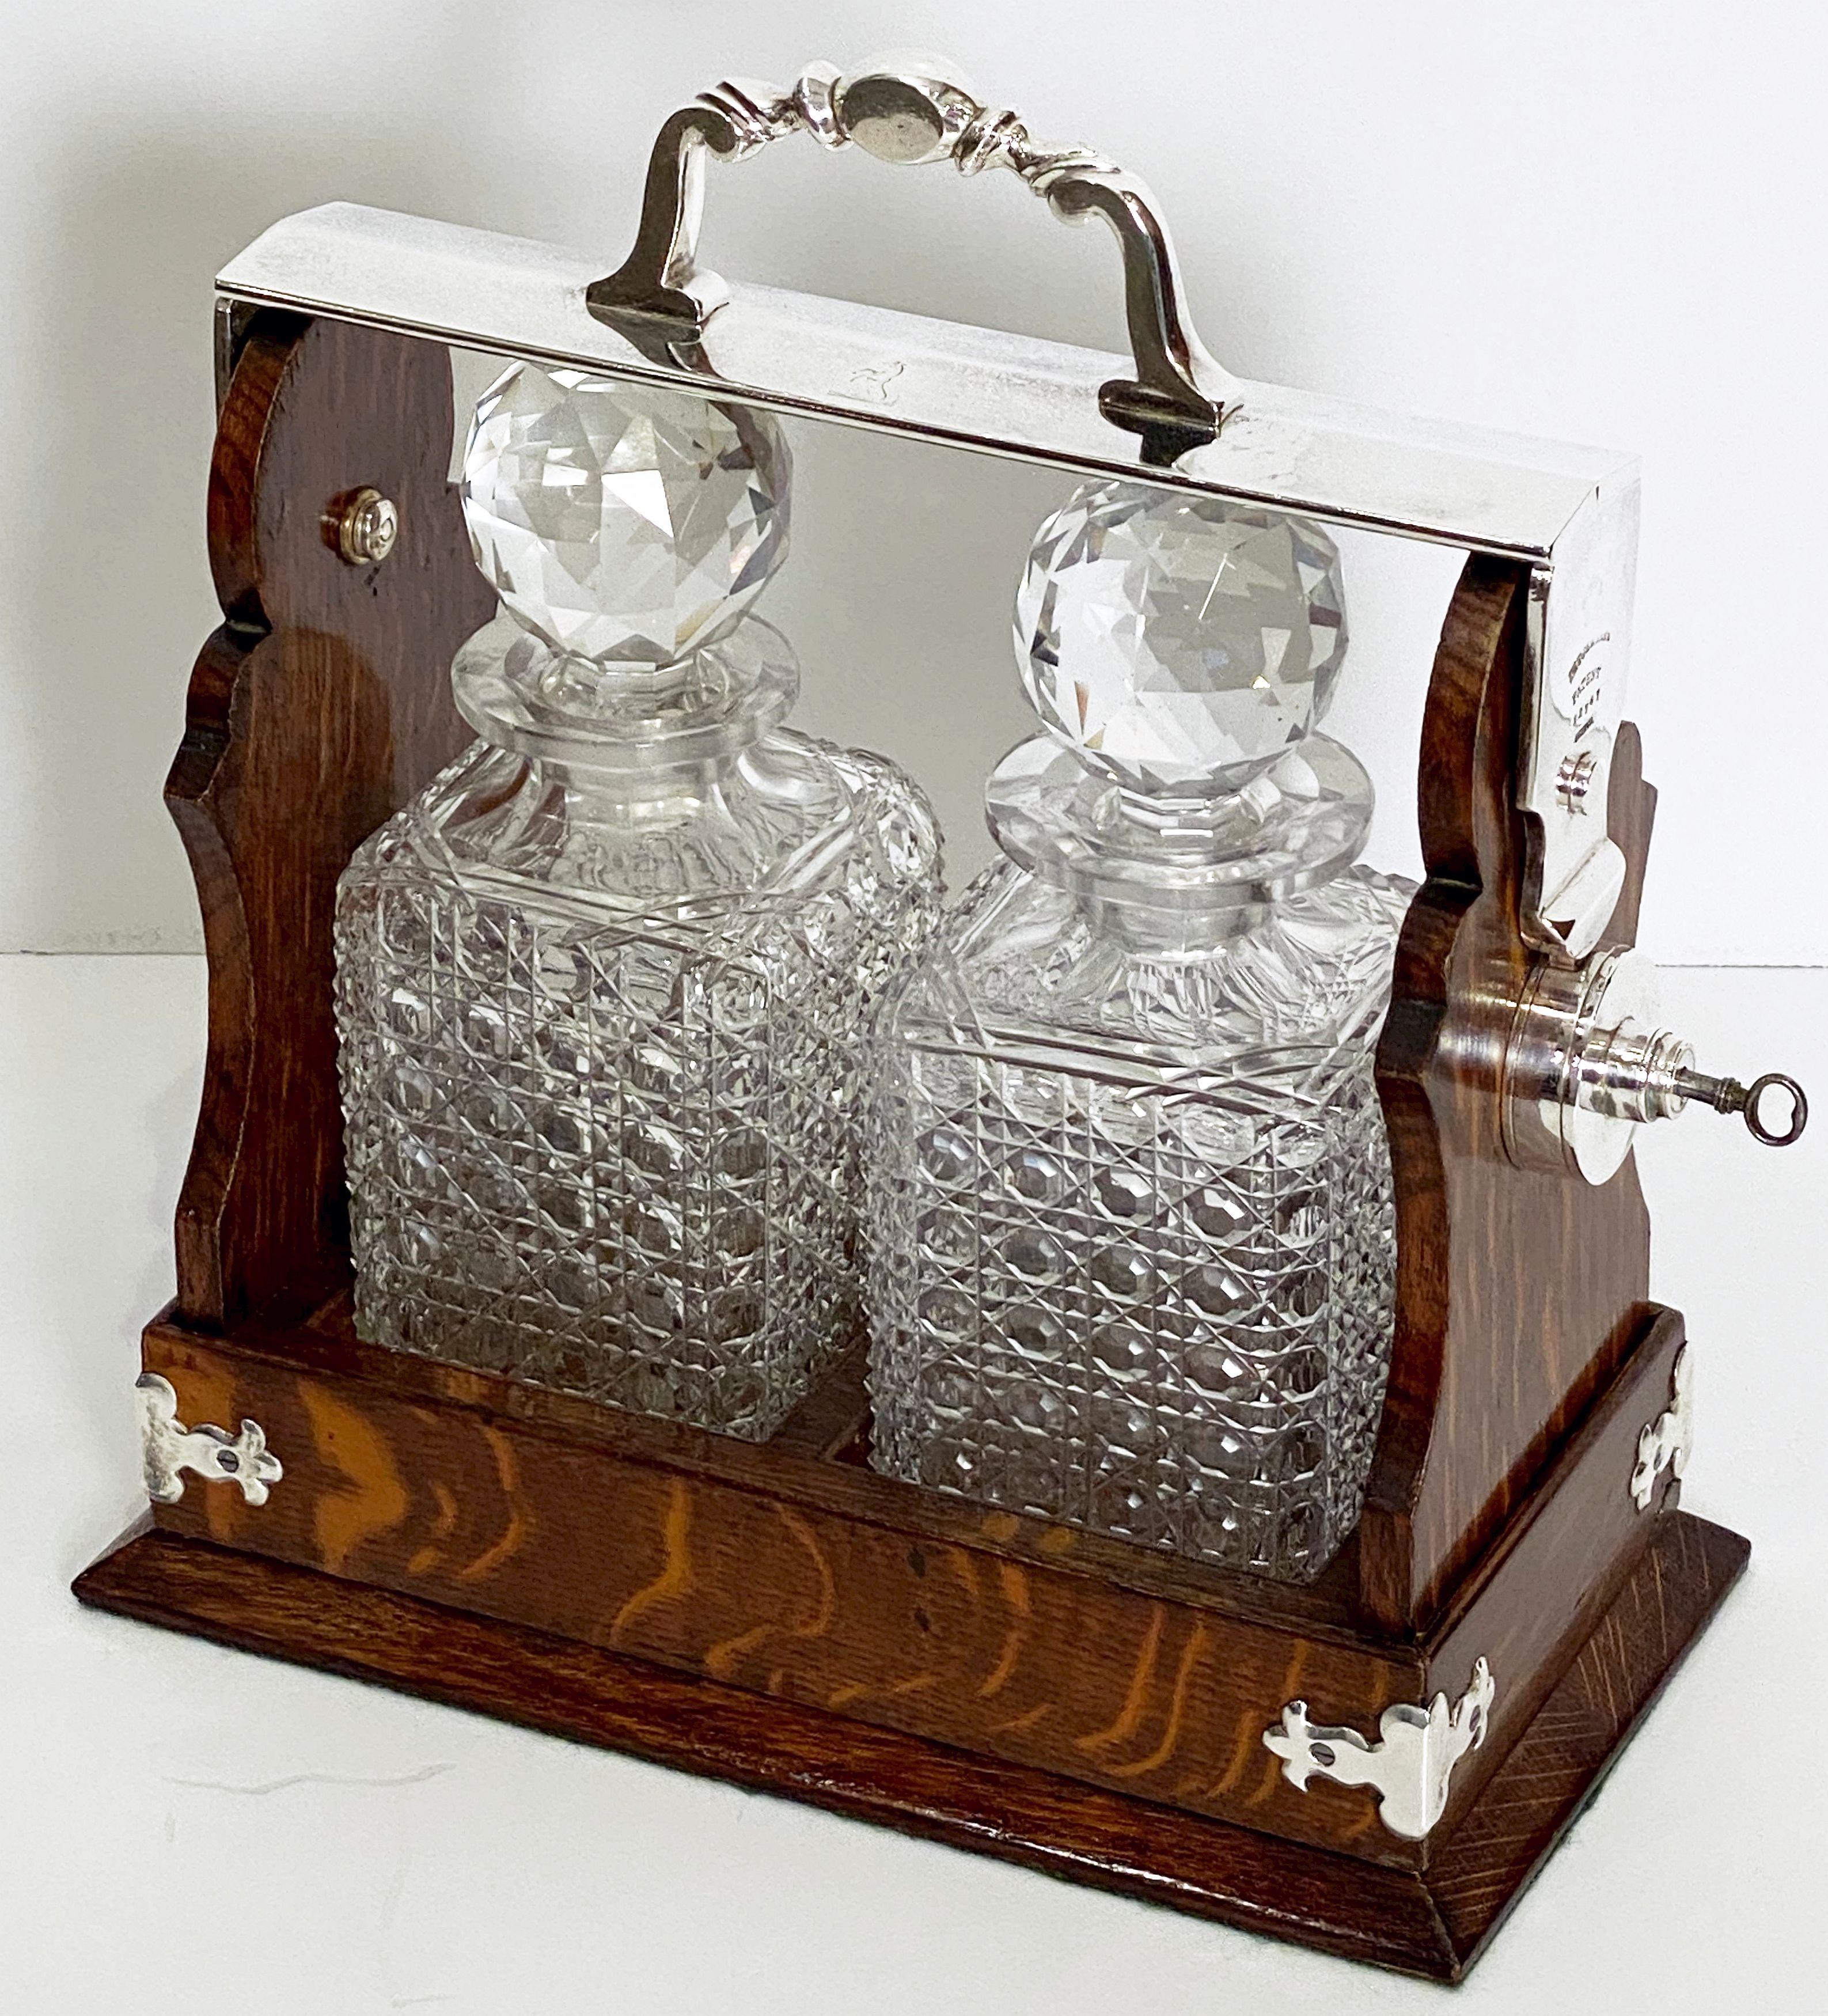 English Oak and Silver Tantalus or Decanter Drinks Set by Betjemann's 1